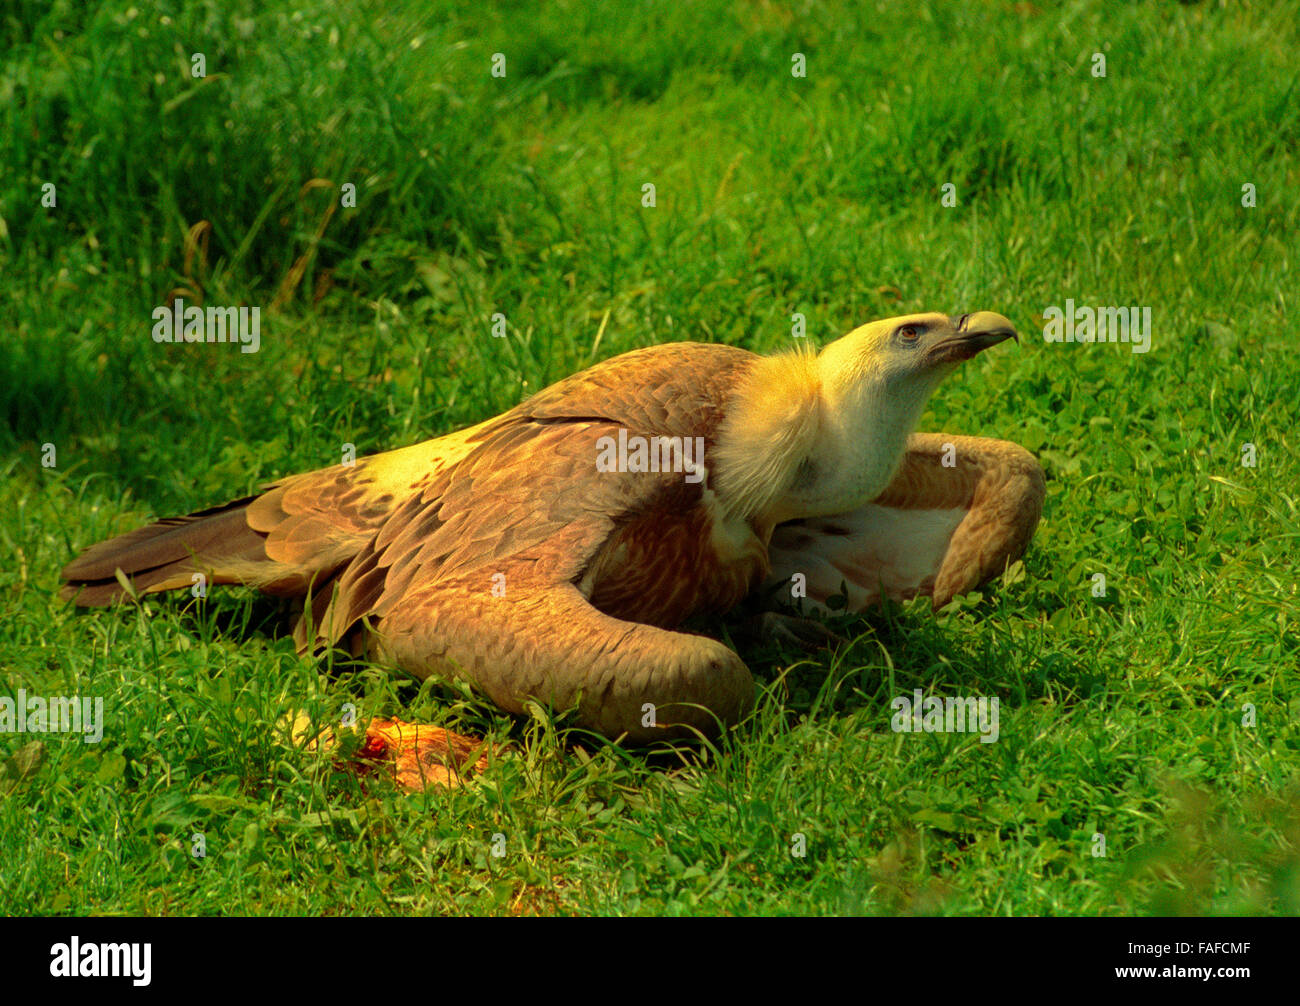 Adult eagle hiding, guarding and protecting its food Stock Photo